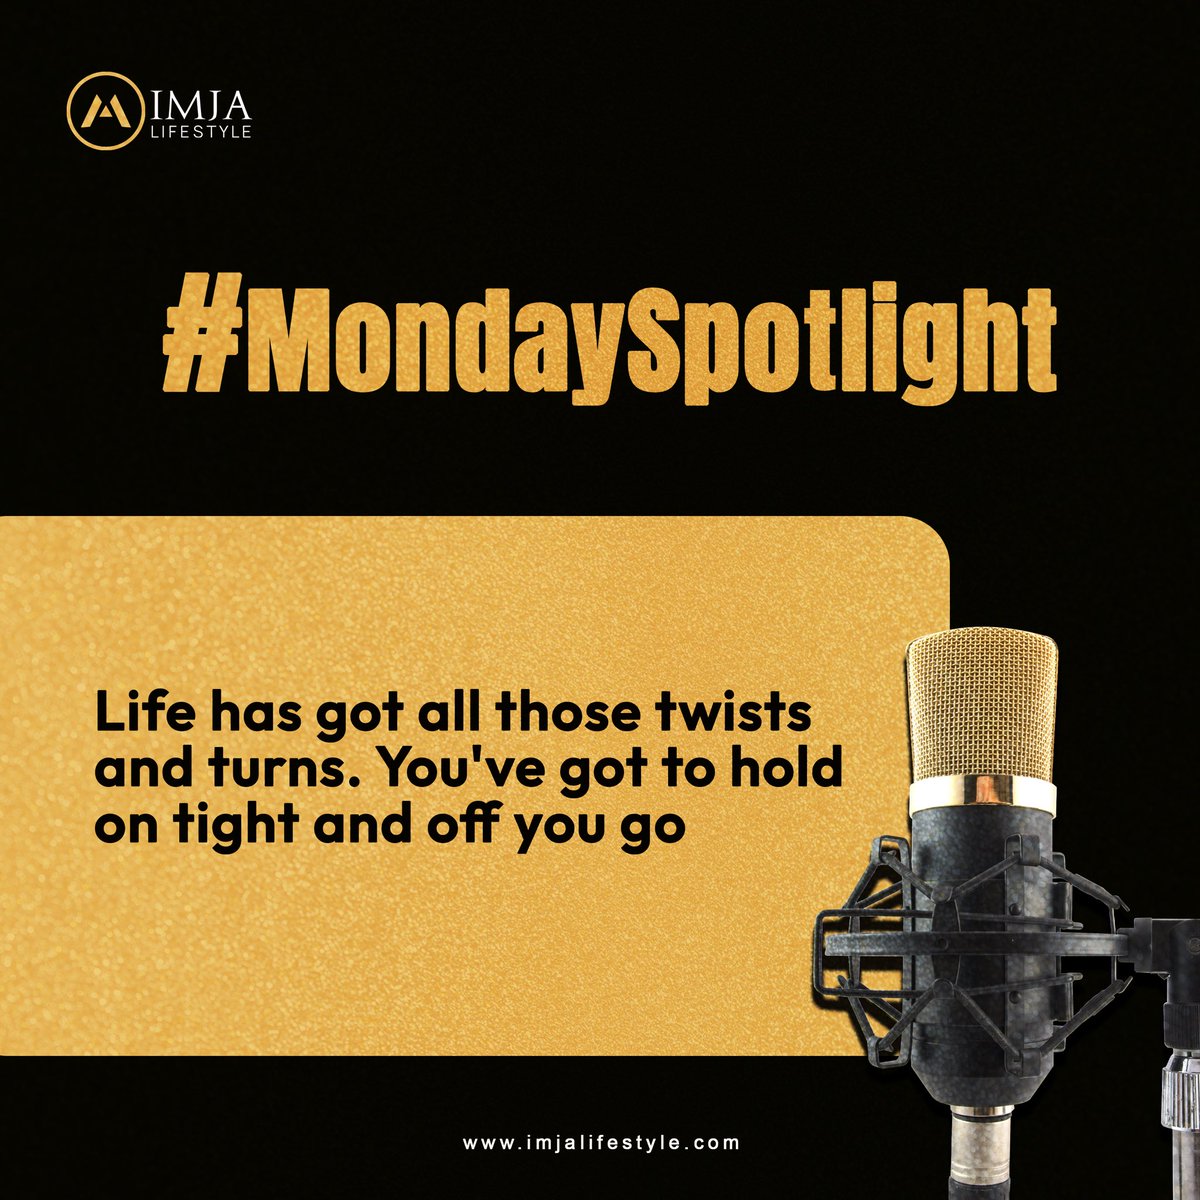 Life has got all those twists and turns. You've got to hold on tight and off you go. 

#MondaySpotLight #imjalifestyle